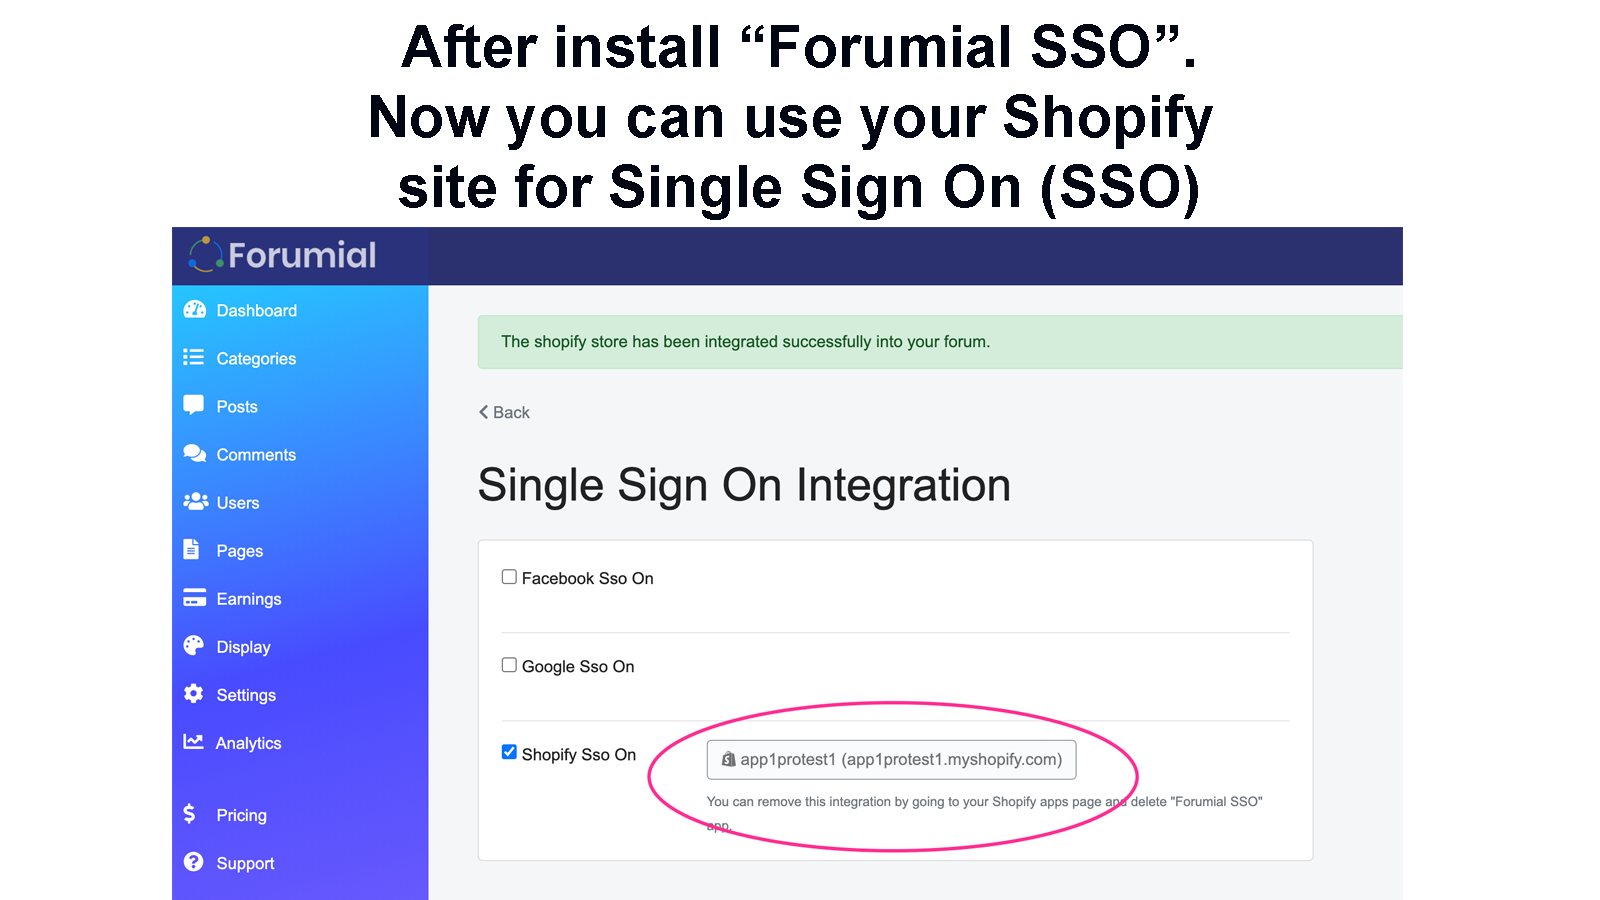 After install Forumial SSO